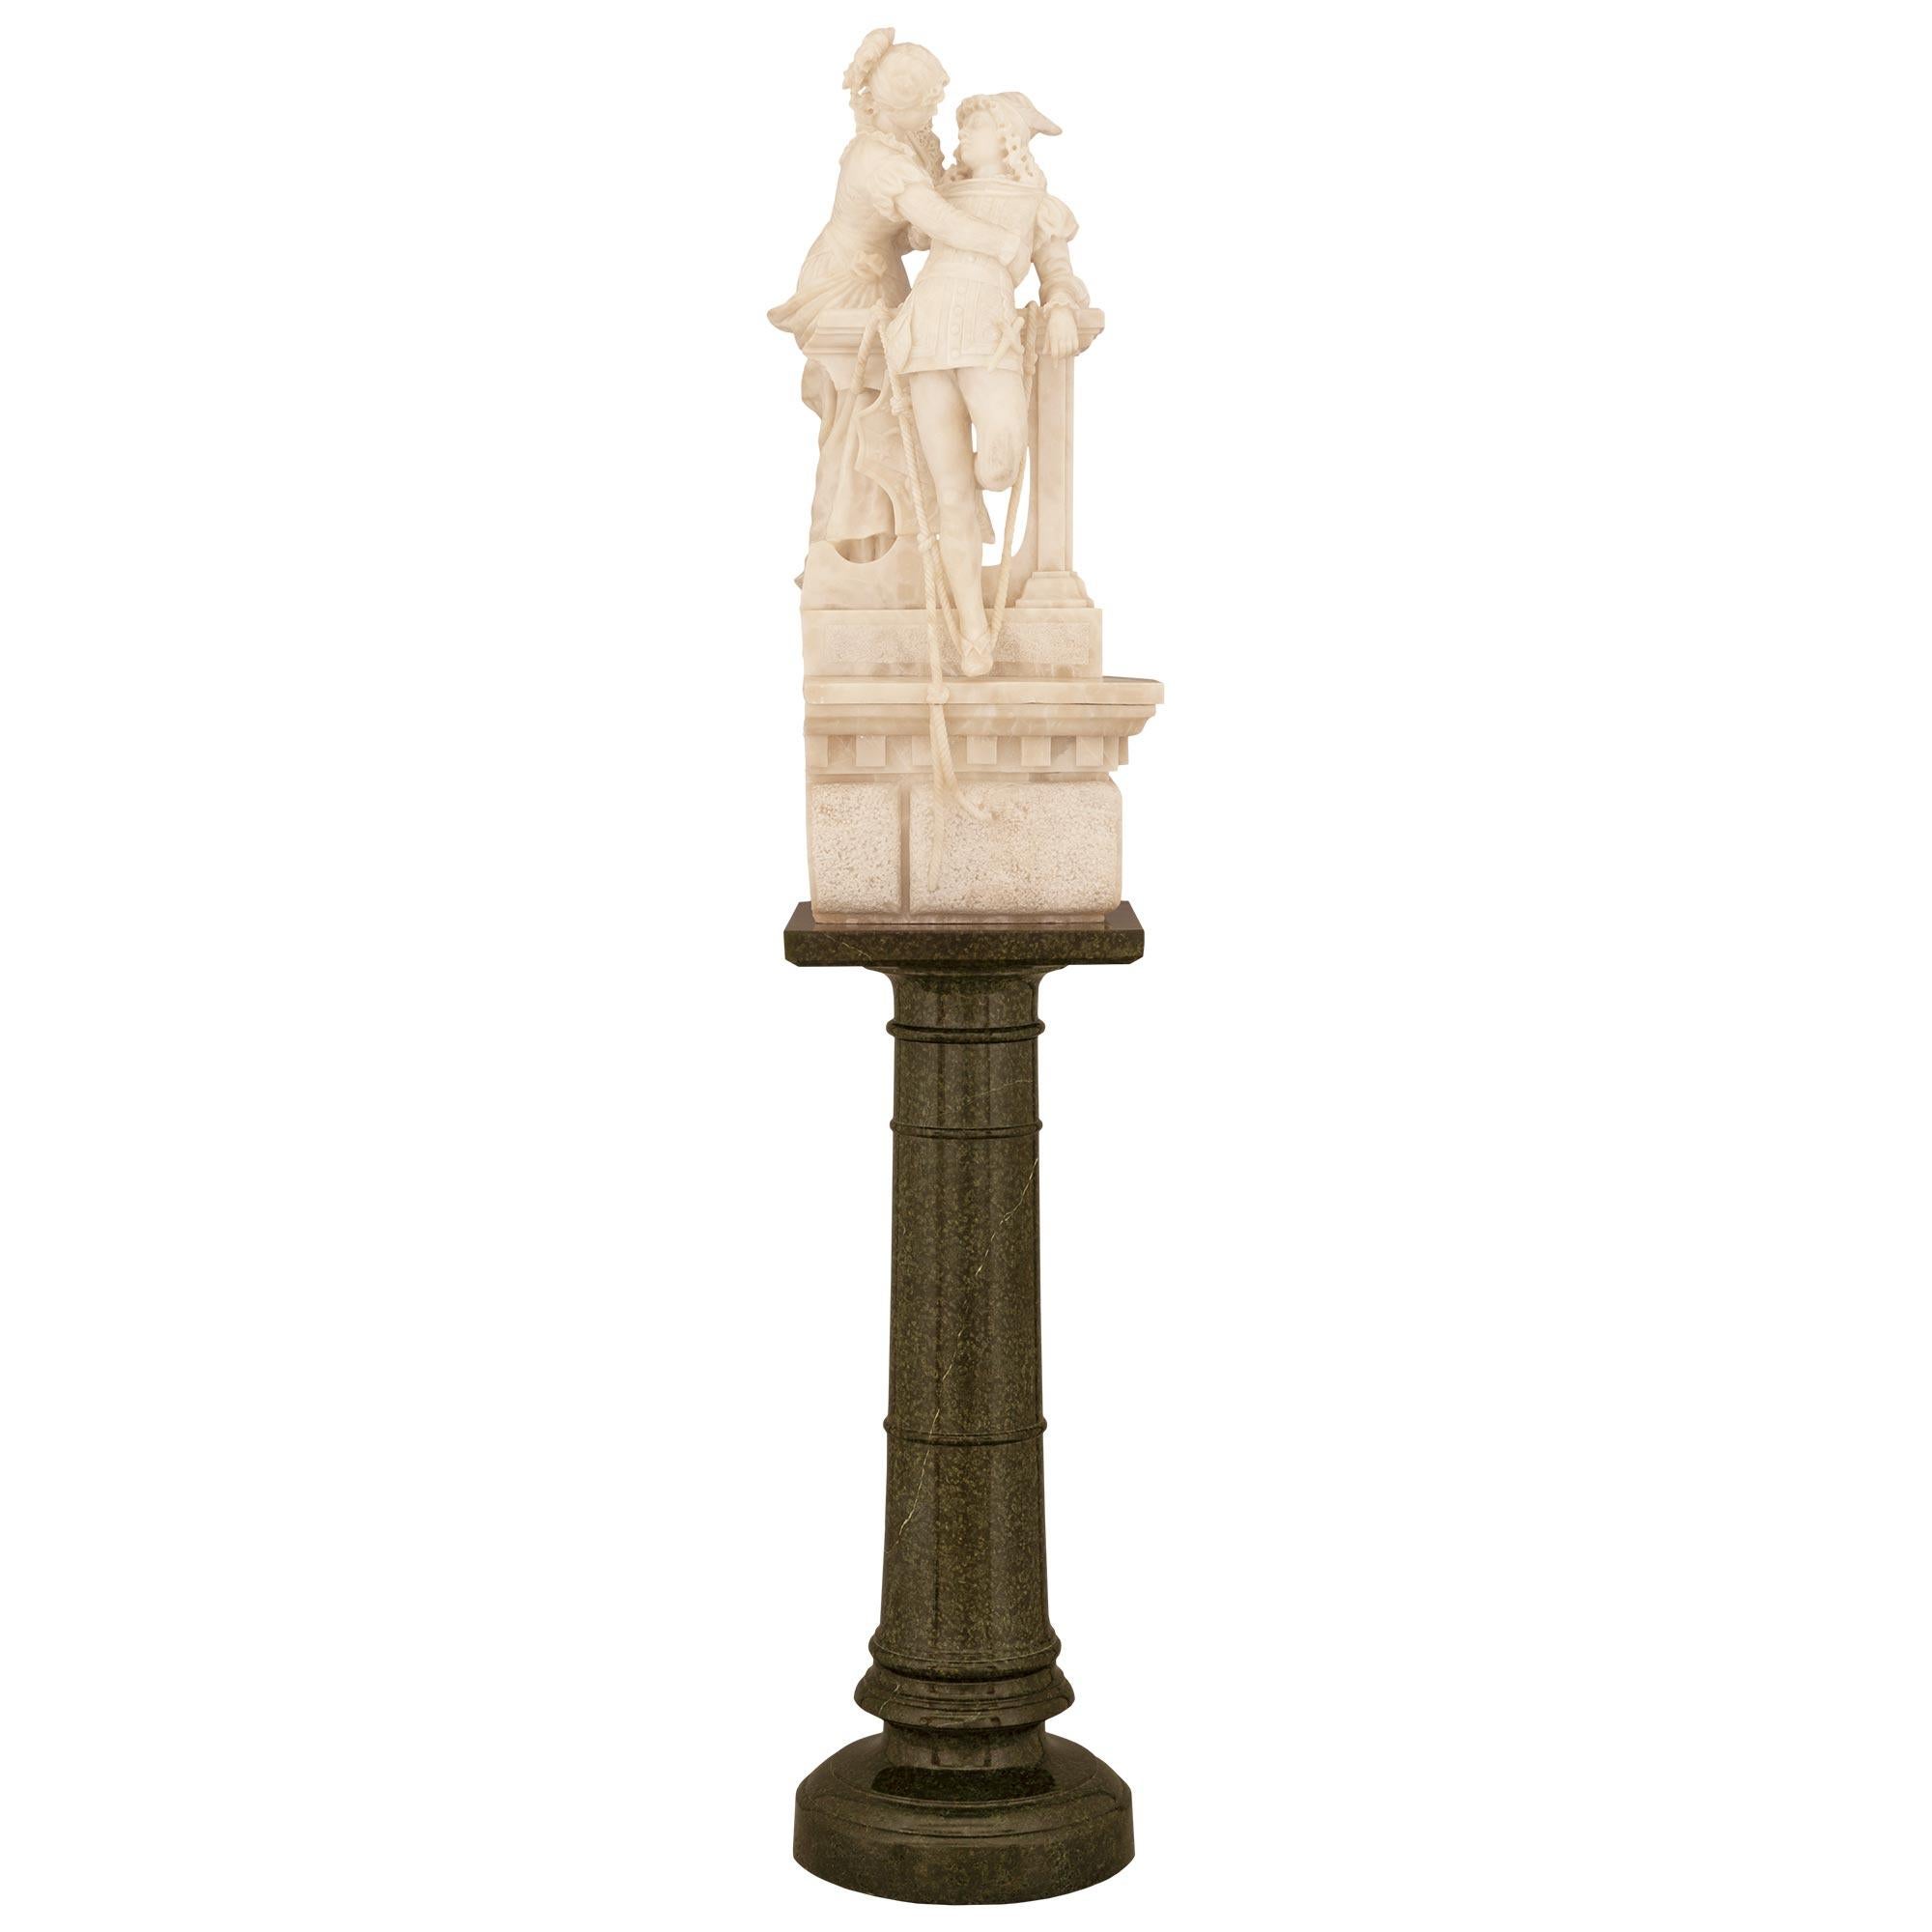 A stunning and extremely high quality Italian 19th century Alabaster statue of Romeo and Juliet signed F. Vichi Firenze 1893 on its original Vert de Patricia pedestal. The pedestal column is raised by a circular base with a fine wrap around mottled